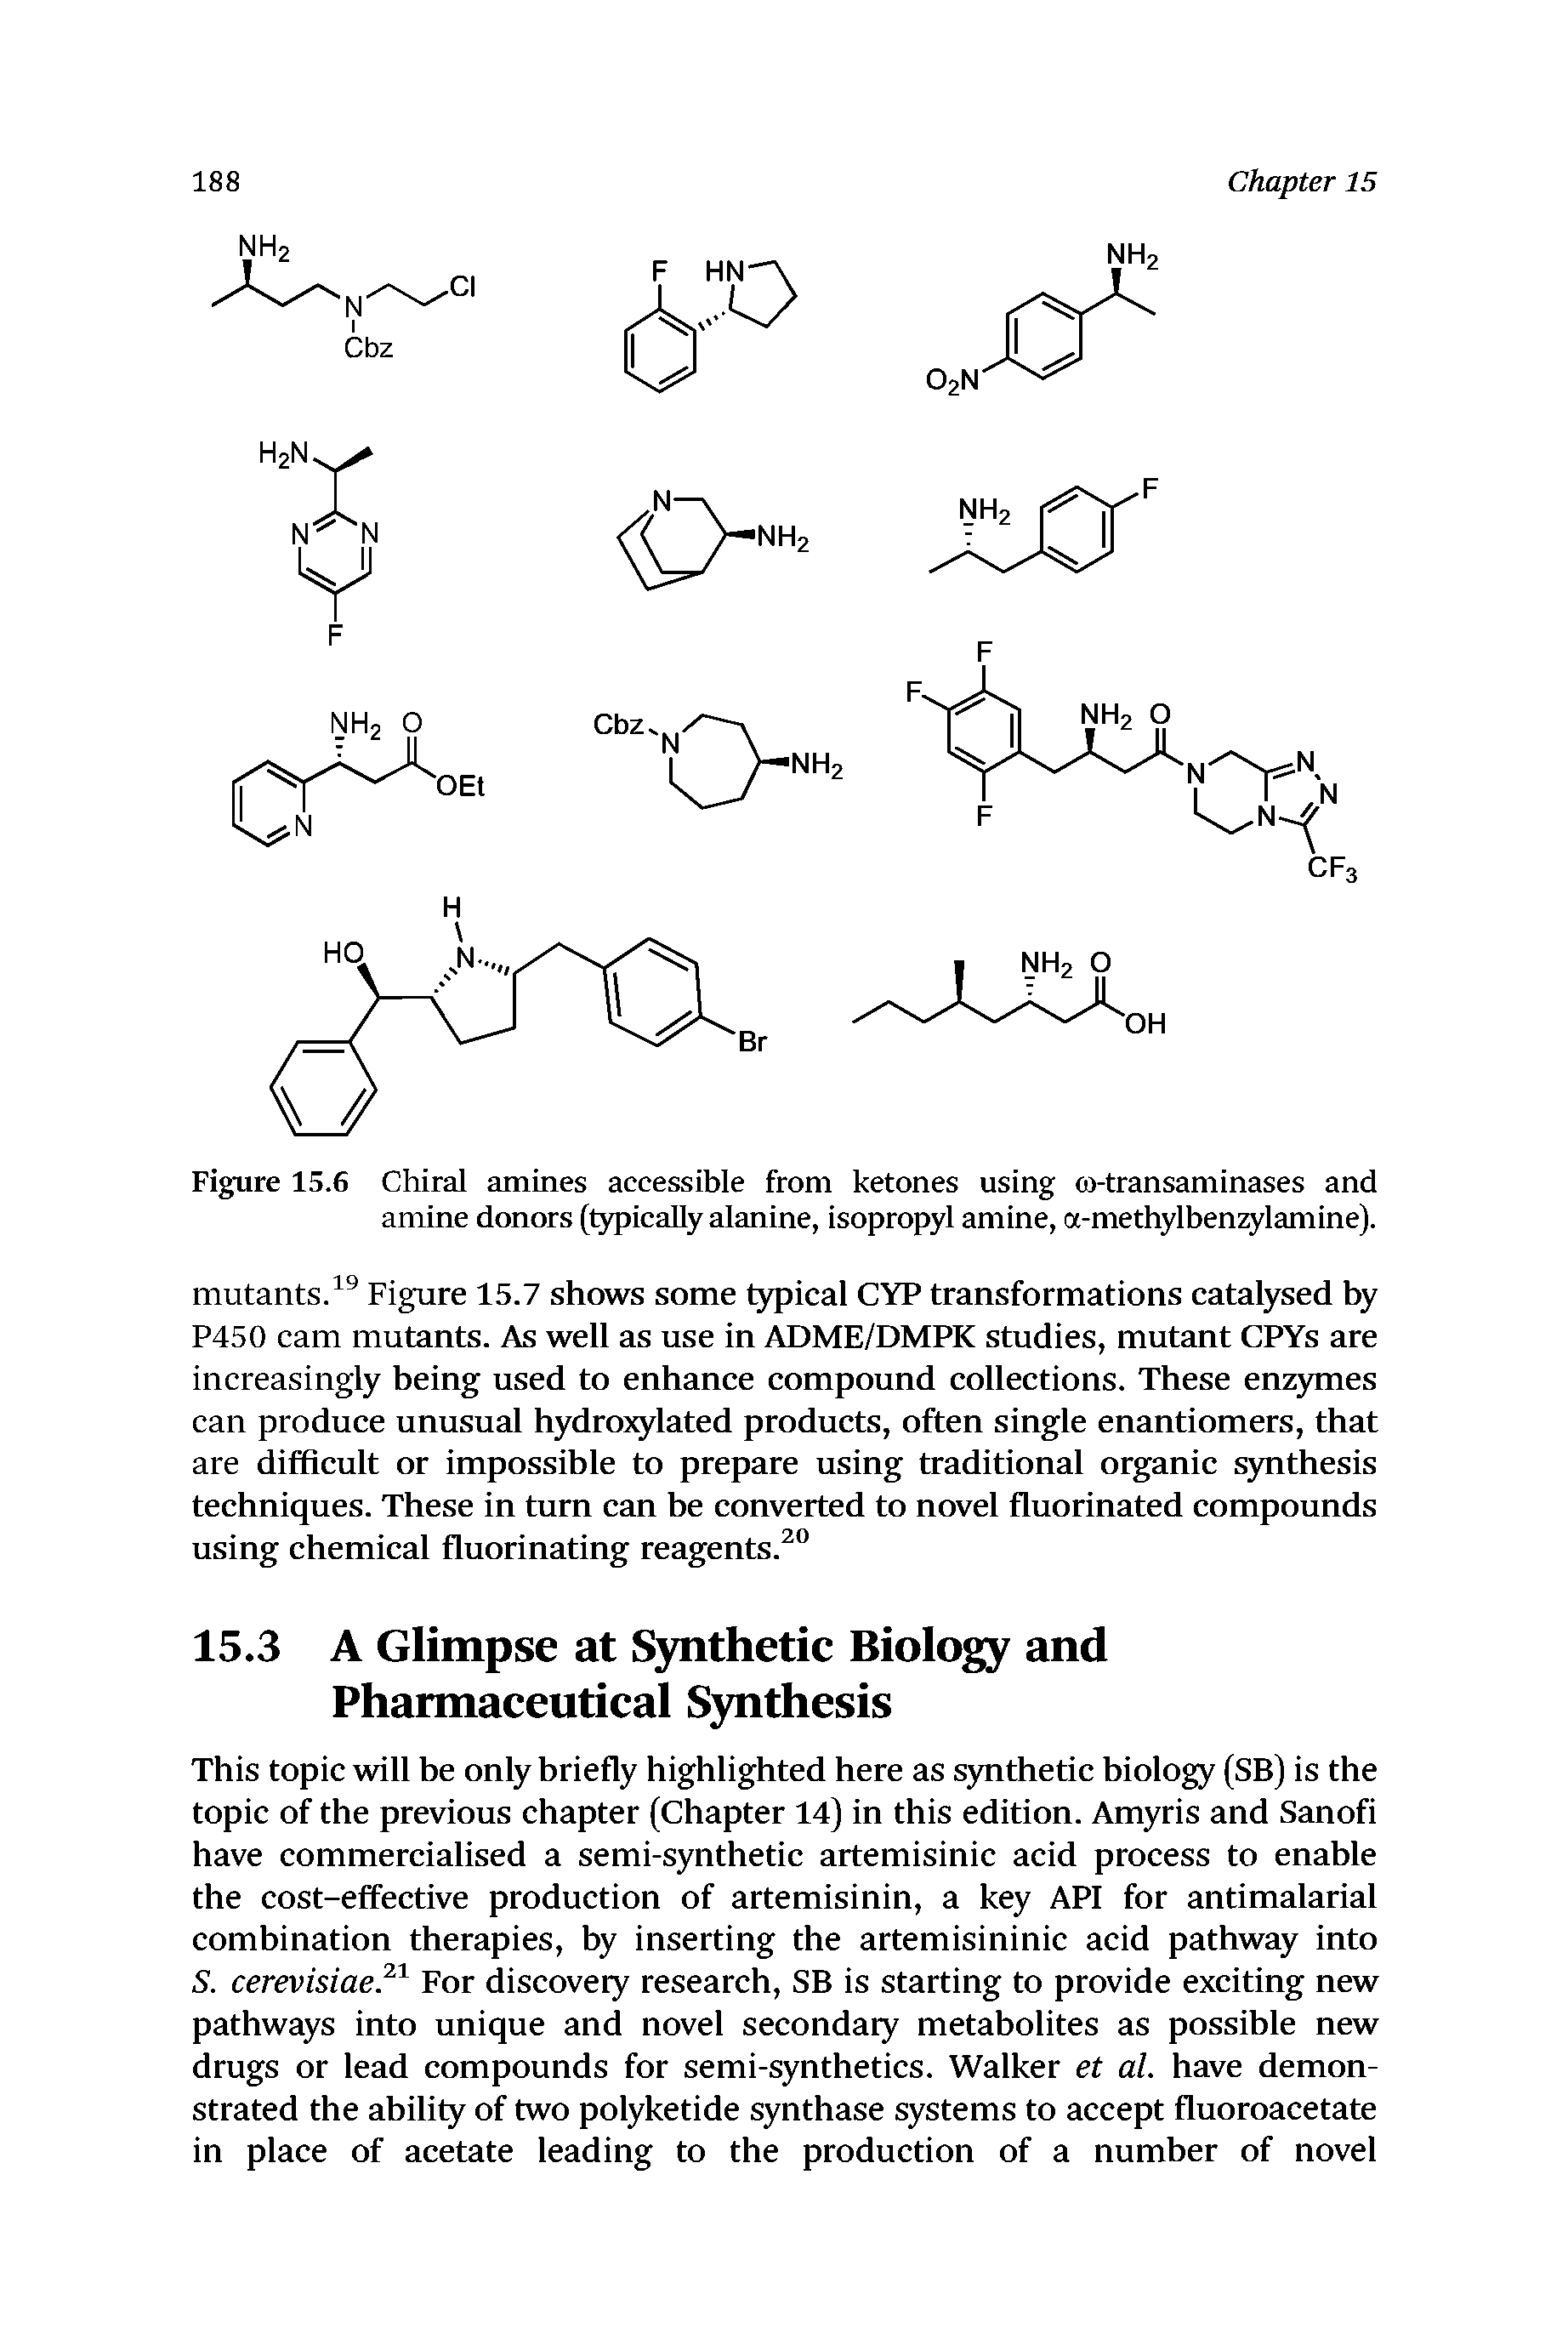 Figure 15.6 Chiral amines accessible from ketones using o-transaminases and amine donors (typically alanine, isopropyl amine, a-methylbenzylamine).